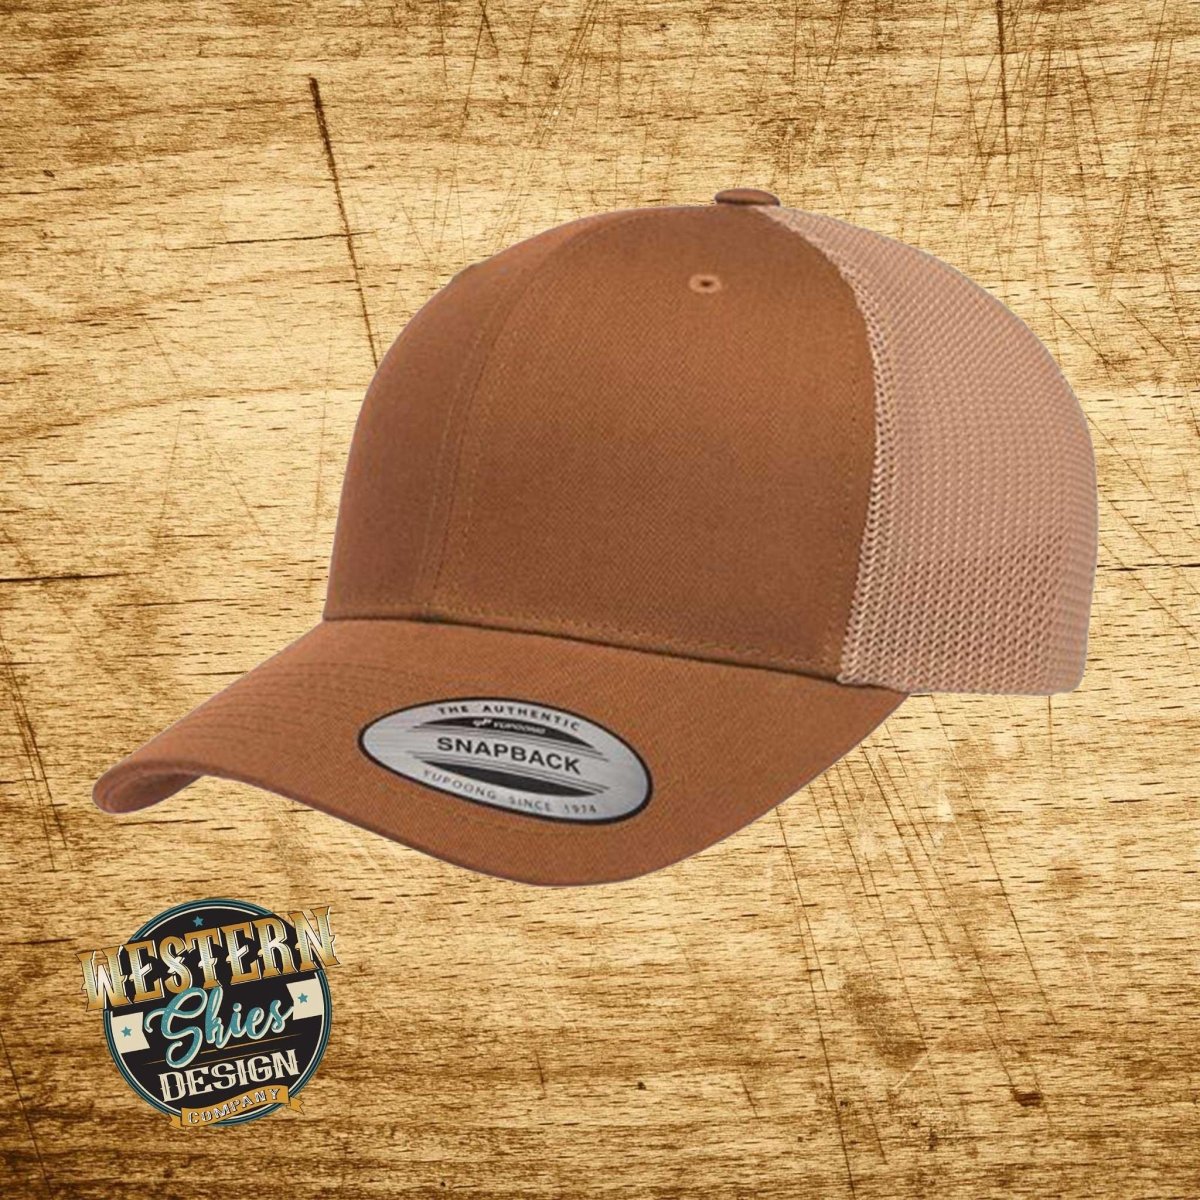 Classic Hat – Trucker Company Western Design Skies 6606 Yupoong